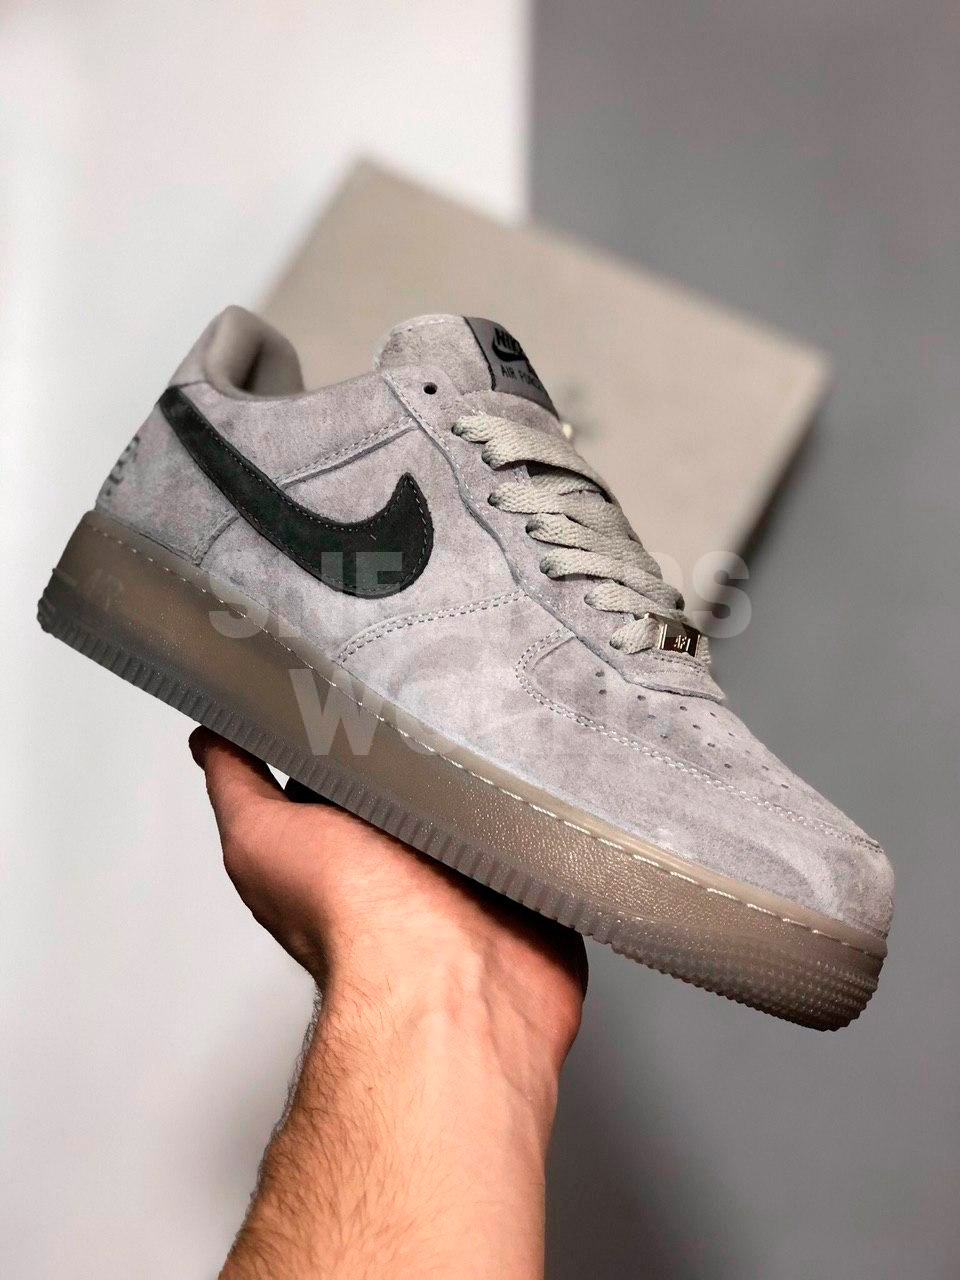 reigning champ nike air force 1